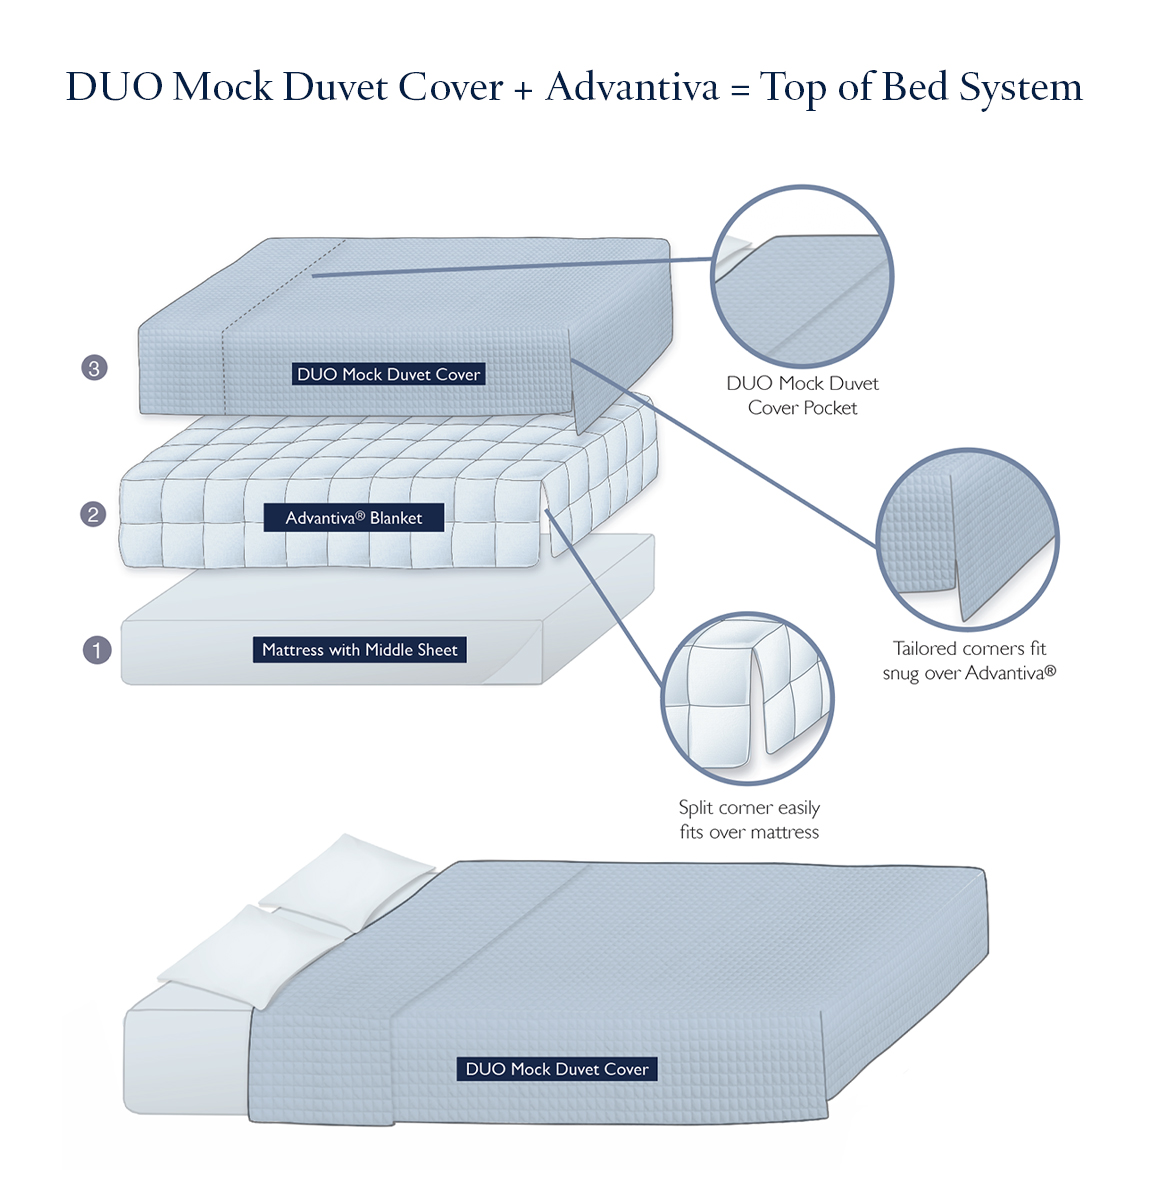 DUO Top of Bed System